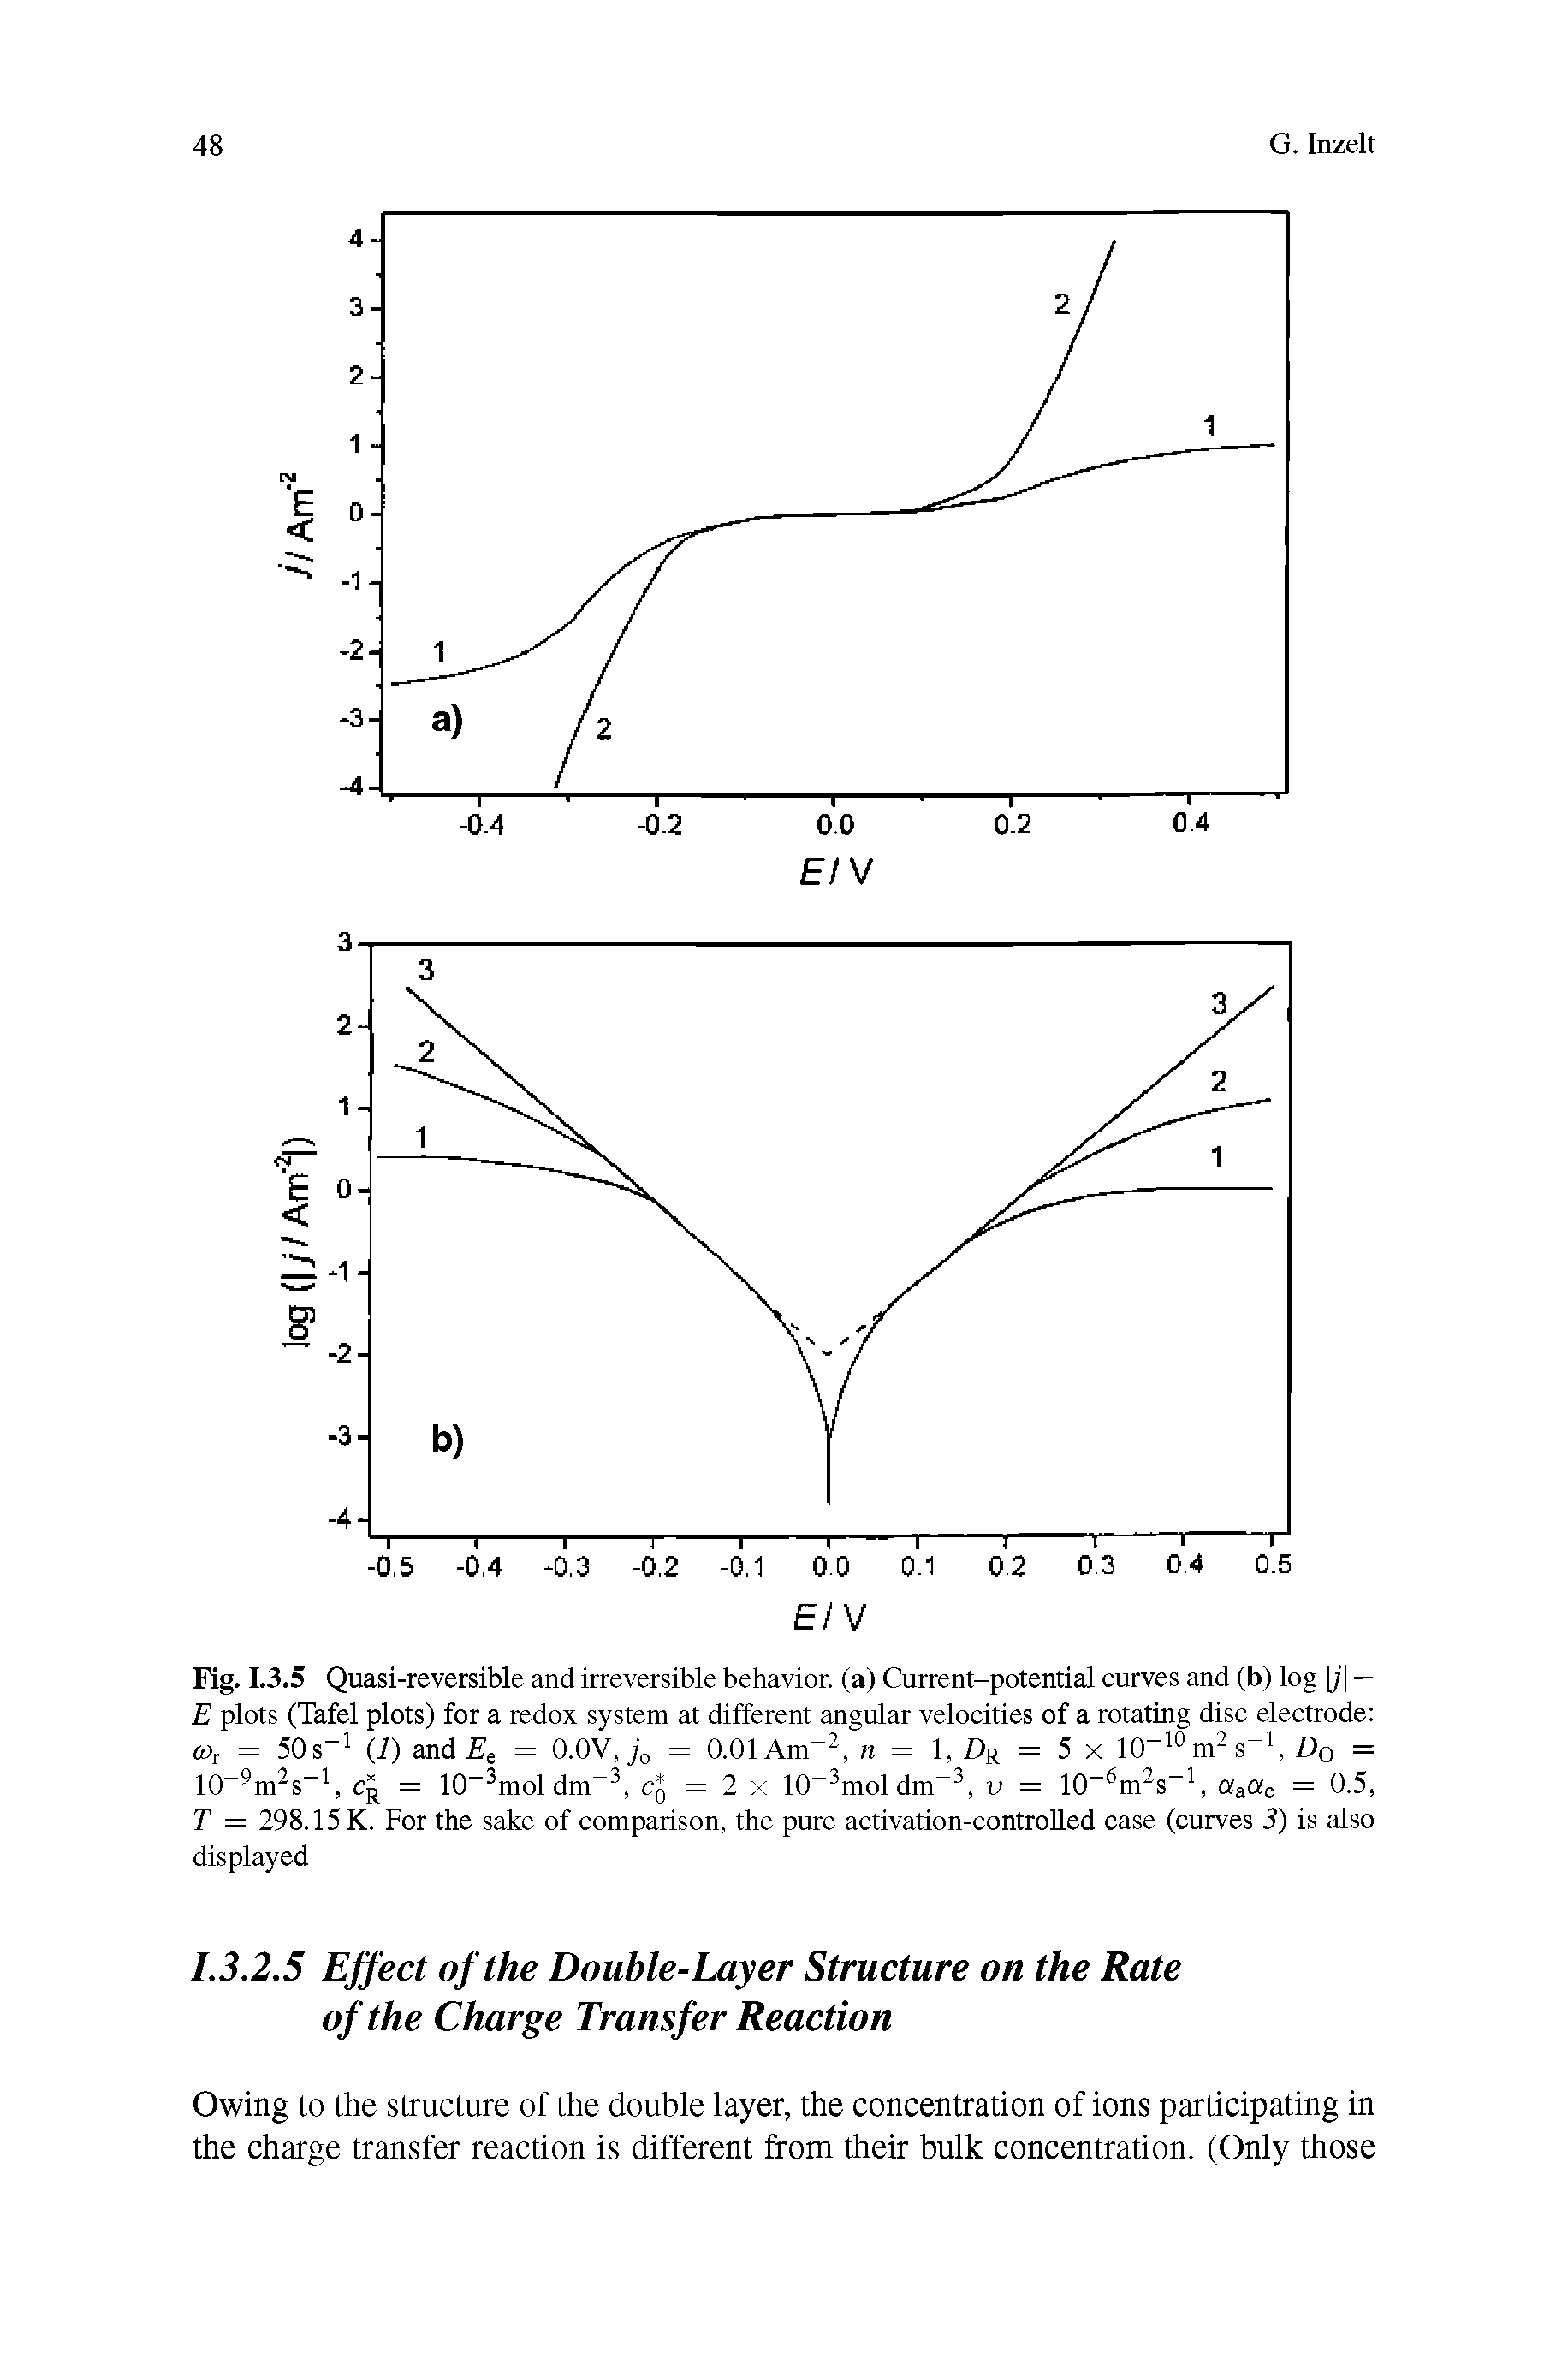 Fig. 1.3.5 Quasi-reversible and irreversible behavior, (a) Current-potential curves and (b) log j — E plots (Tafel plots) for a redox system at different angular velocities of a rotating disc electrode ct>r = 50s (i) and Fe = O.OV, jo = O.OlAm, n = 1, = 5 x 10 m s, Dq =...